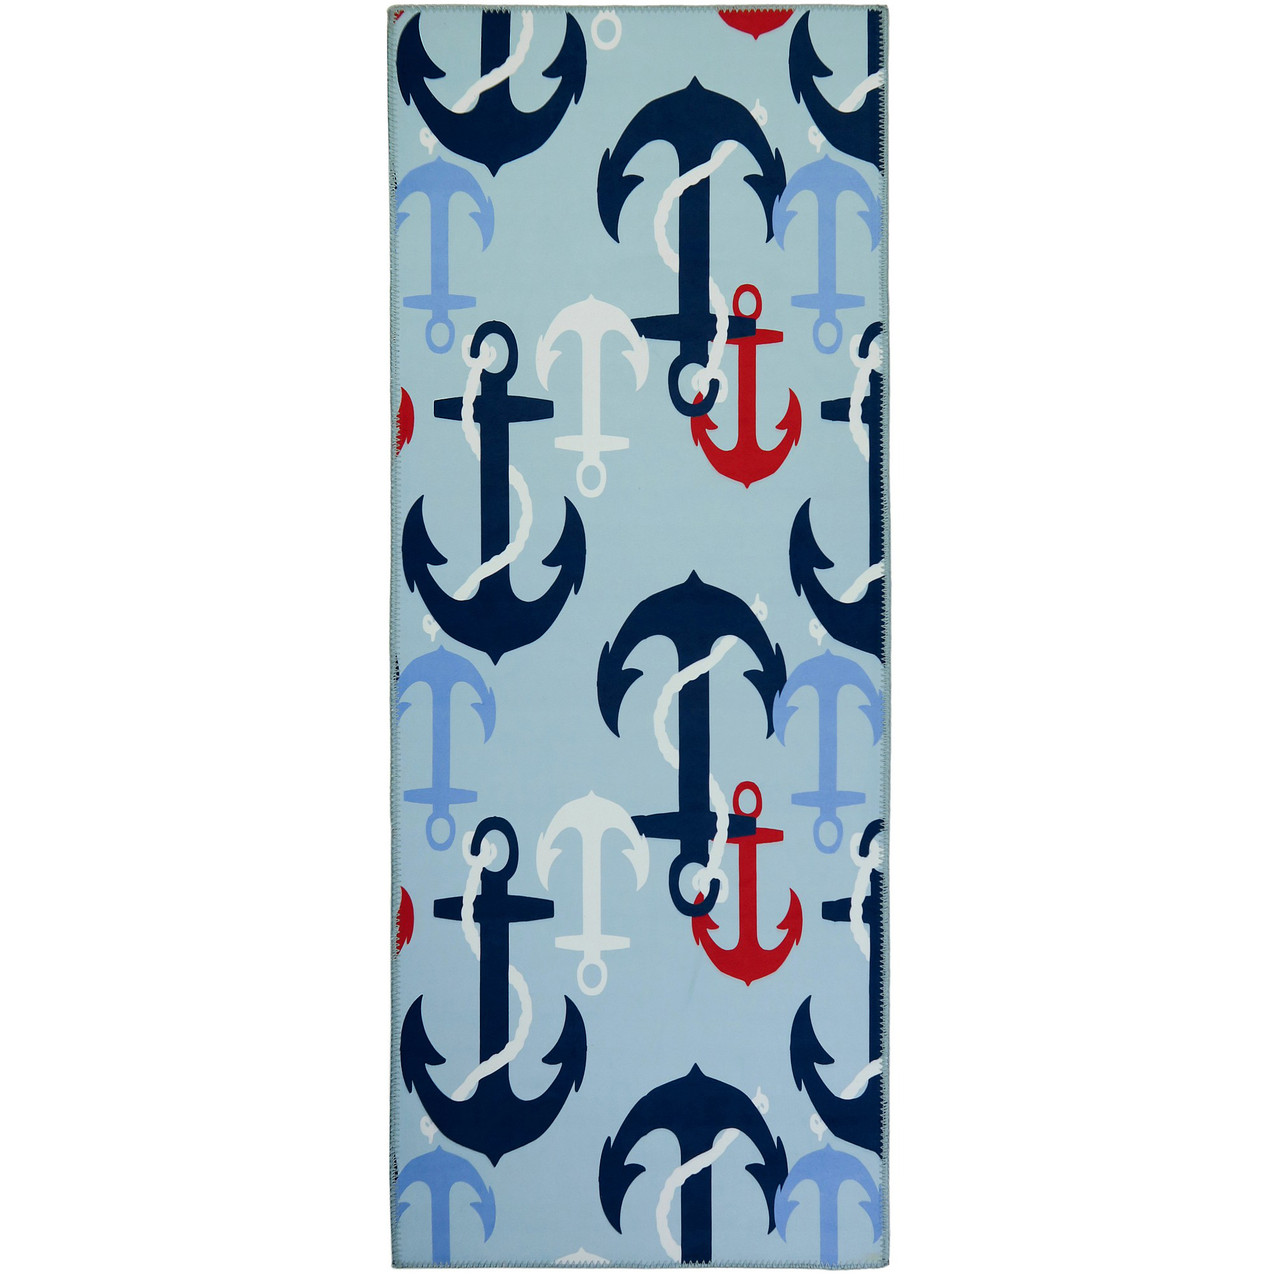 Anchor Rug Nautical Rug Boaters Rugs Navy White Floor Rug Beachy Rugs 3x5  4x6 5x7 5x8 8x10 Large Rug Beach Decor Anchors Rope Boating 